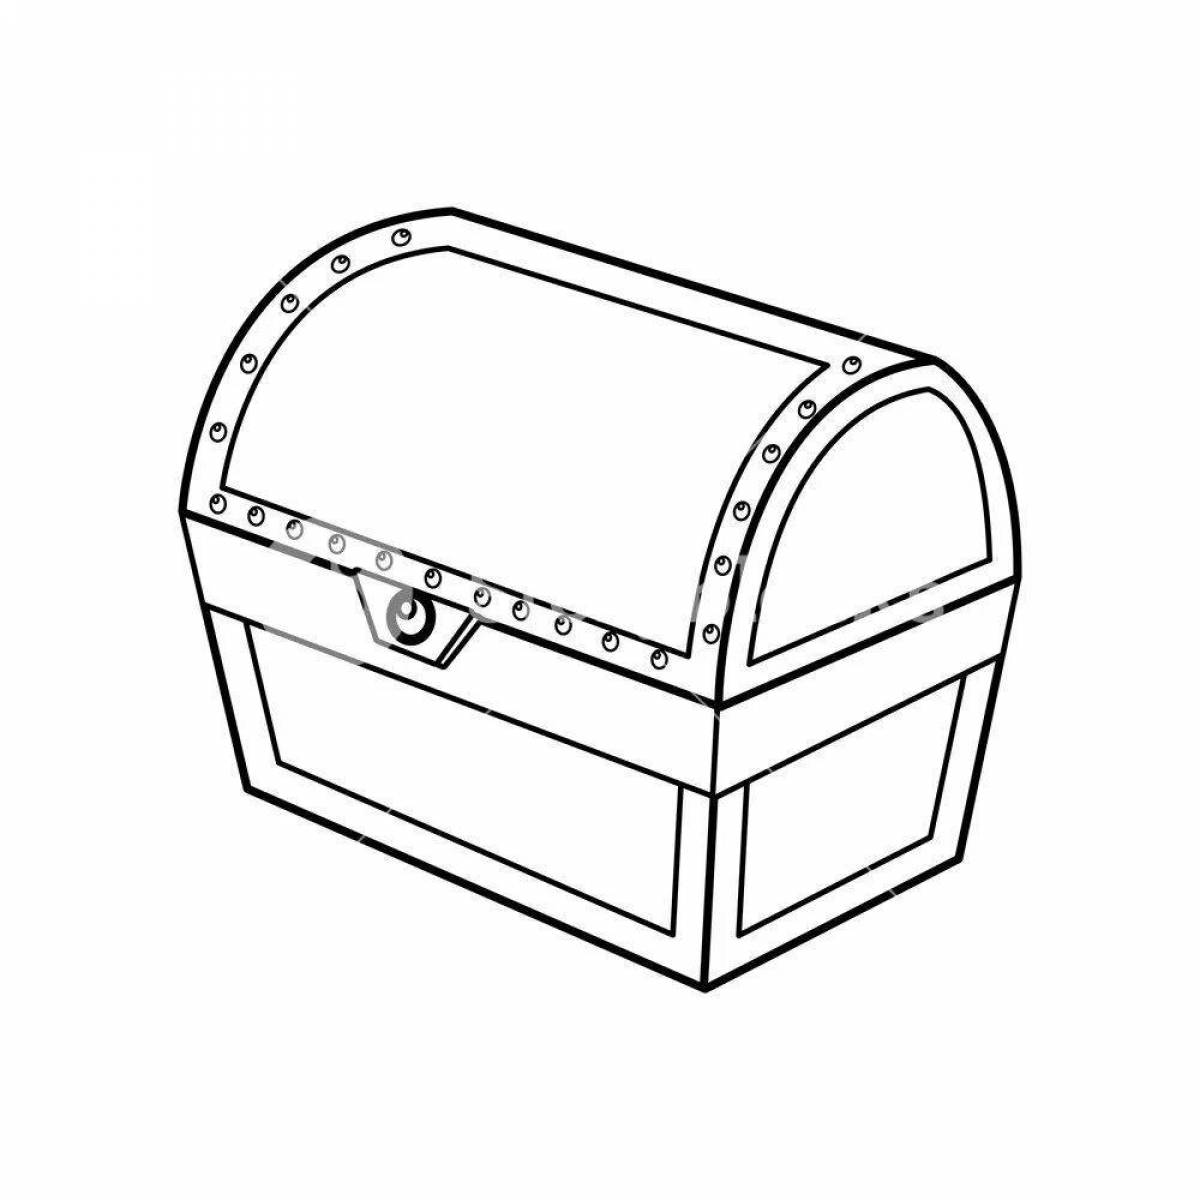 Gorgeous Jewelry Box Coloring Page for Preschoolers